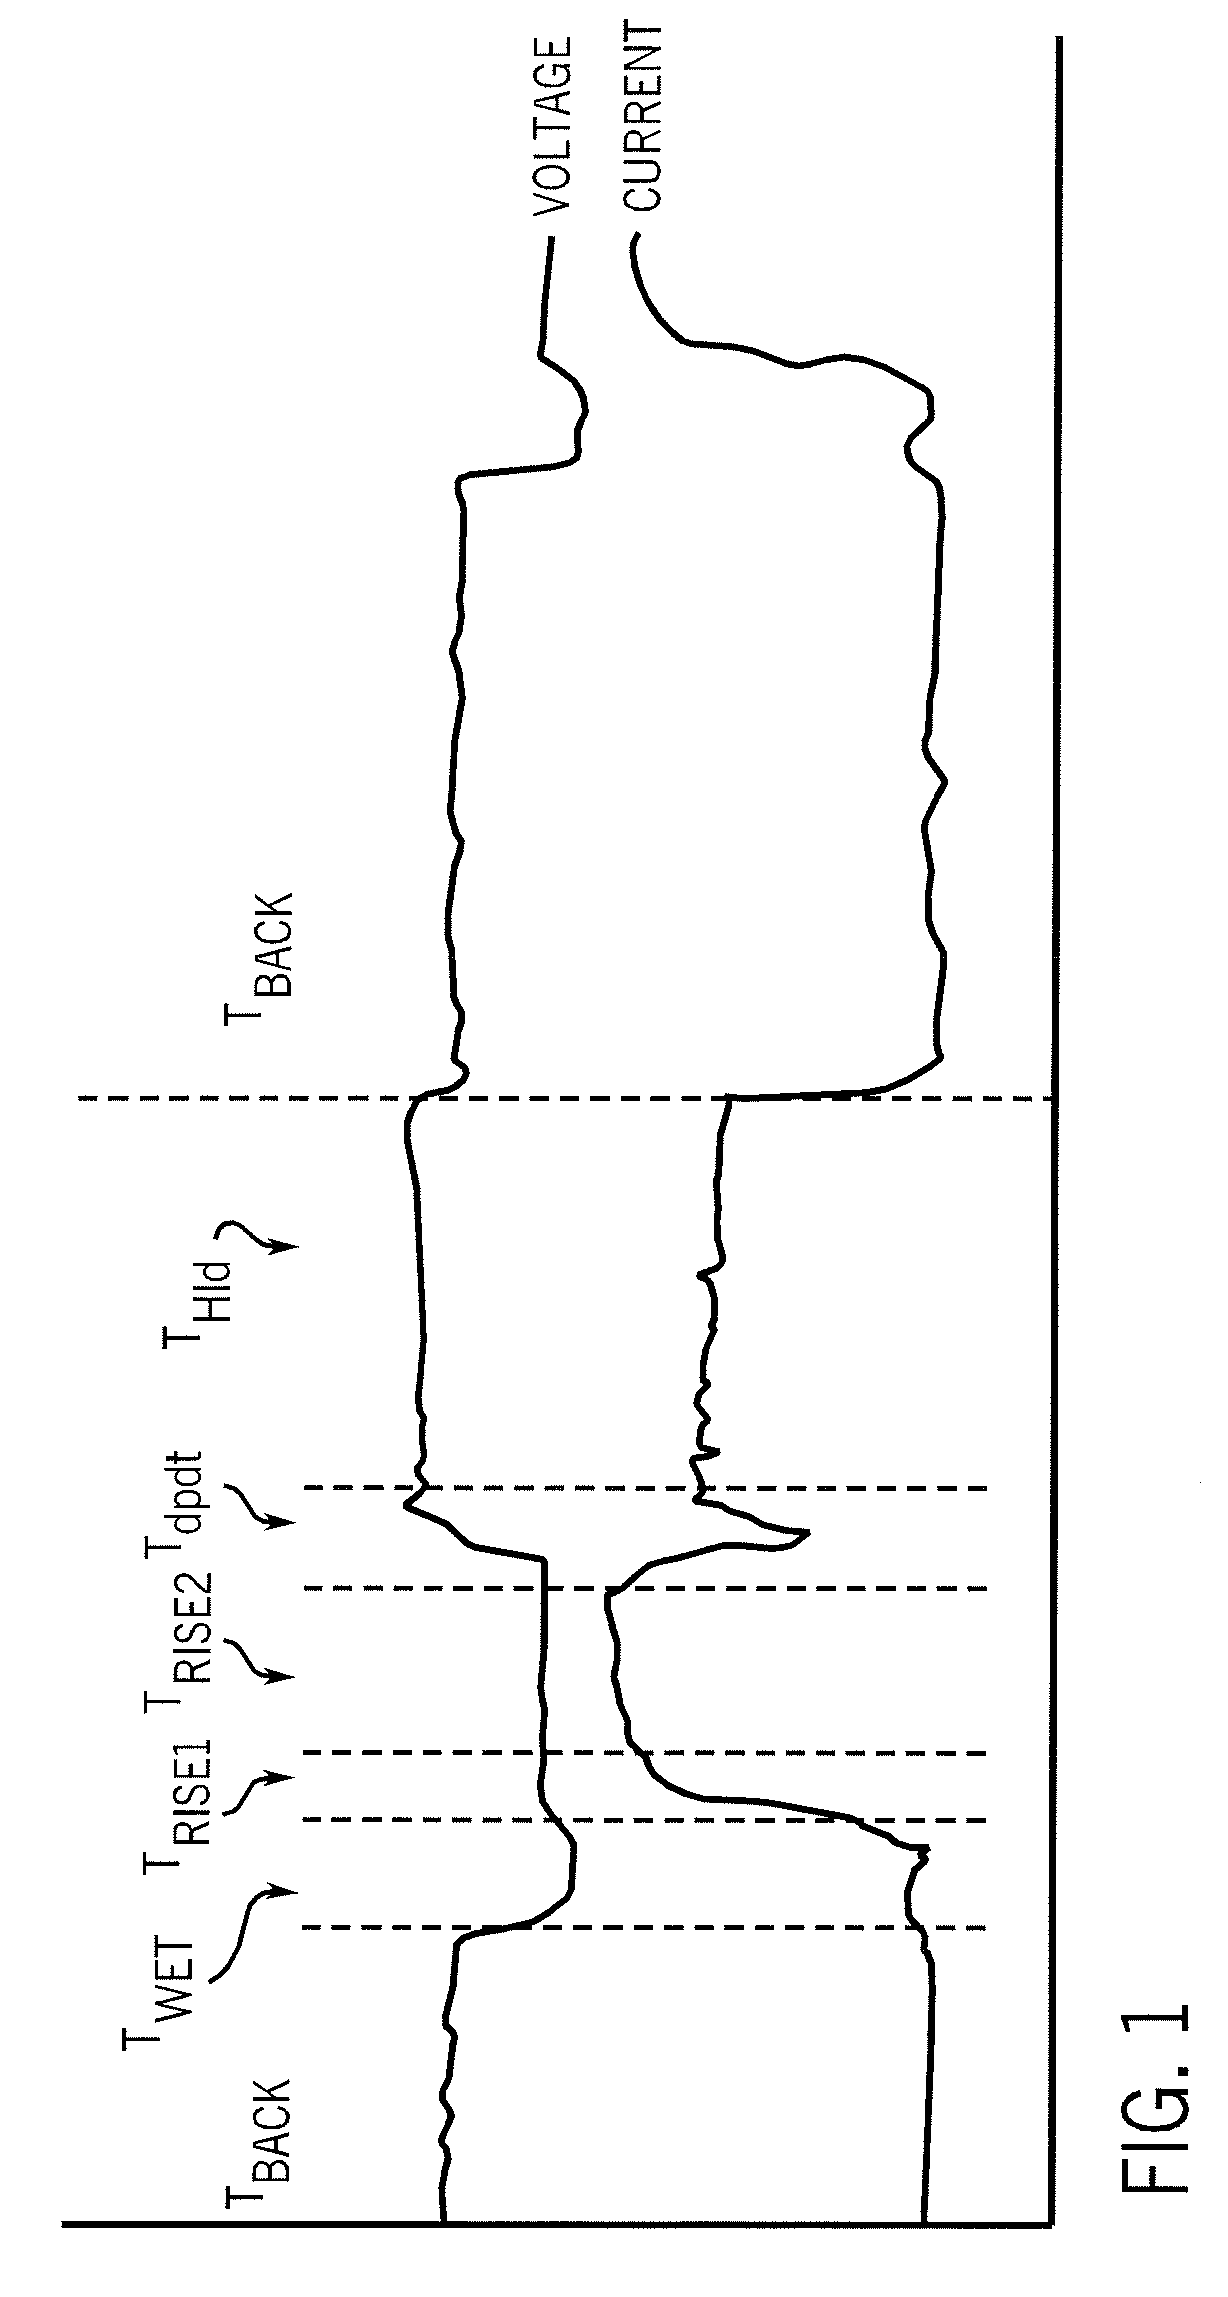 Method and apparatus for welding